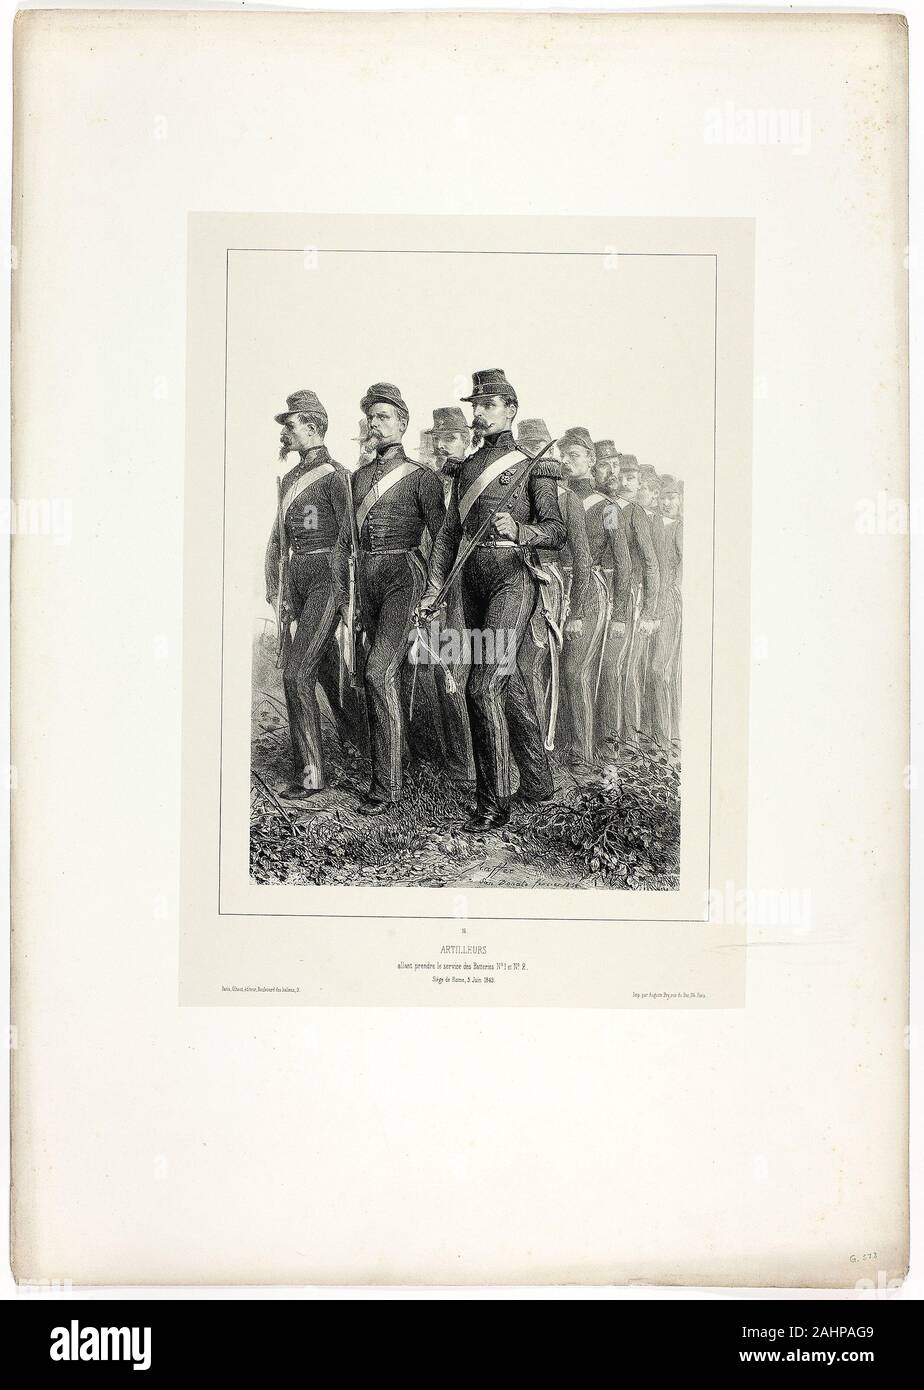 Denis Auguste Marie Raffet. Artillery men, from Souvenirs d’Italie Expédition de Rome. 1858. France. Lithograph in black on ivory wove chine laid down on ivory wove paper Stock Photo